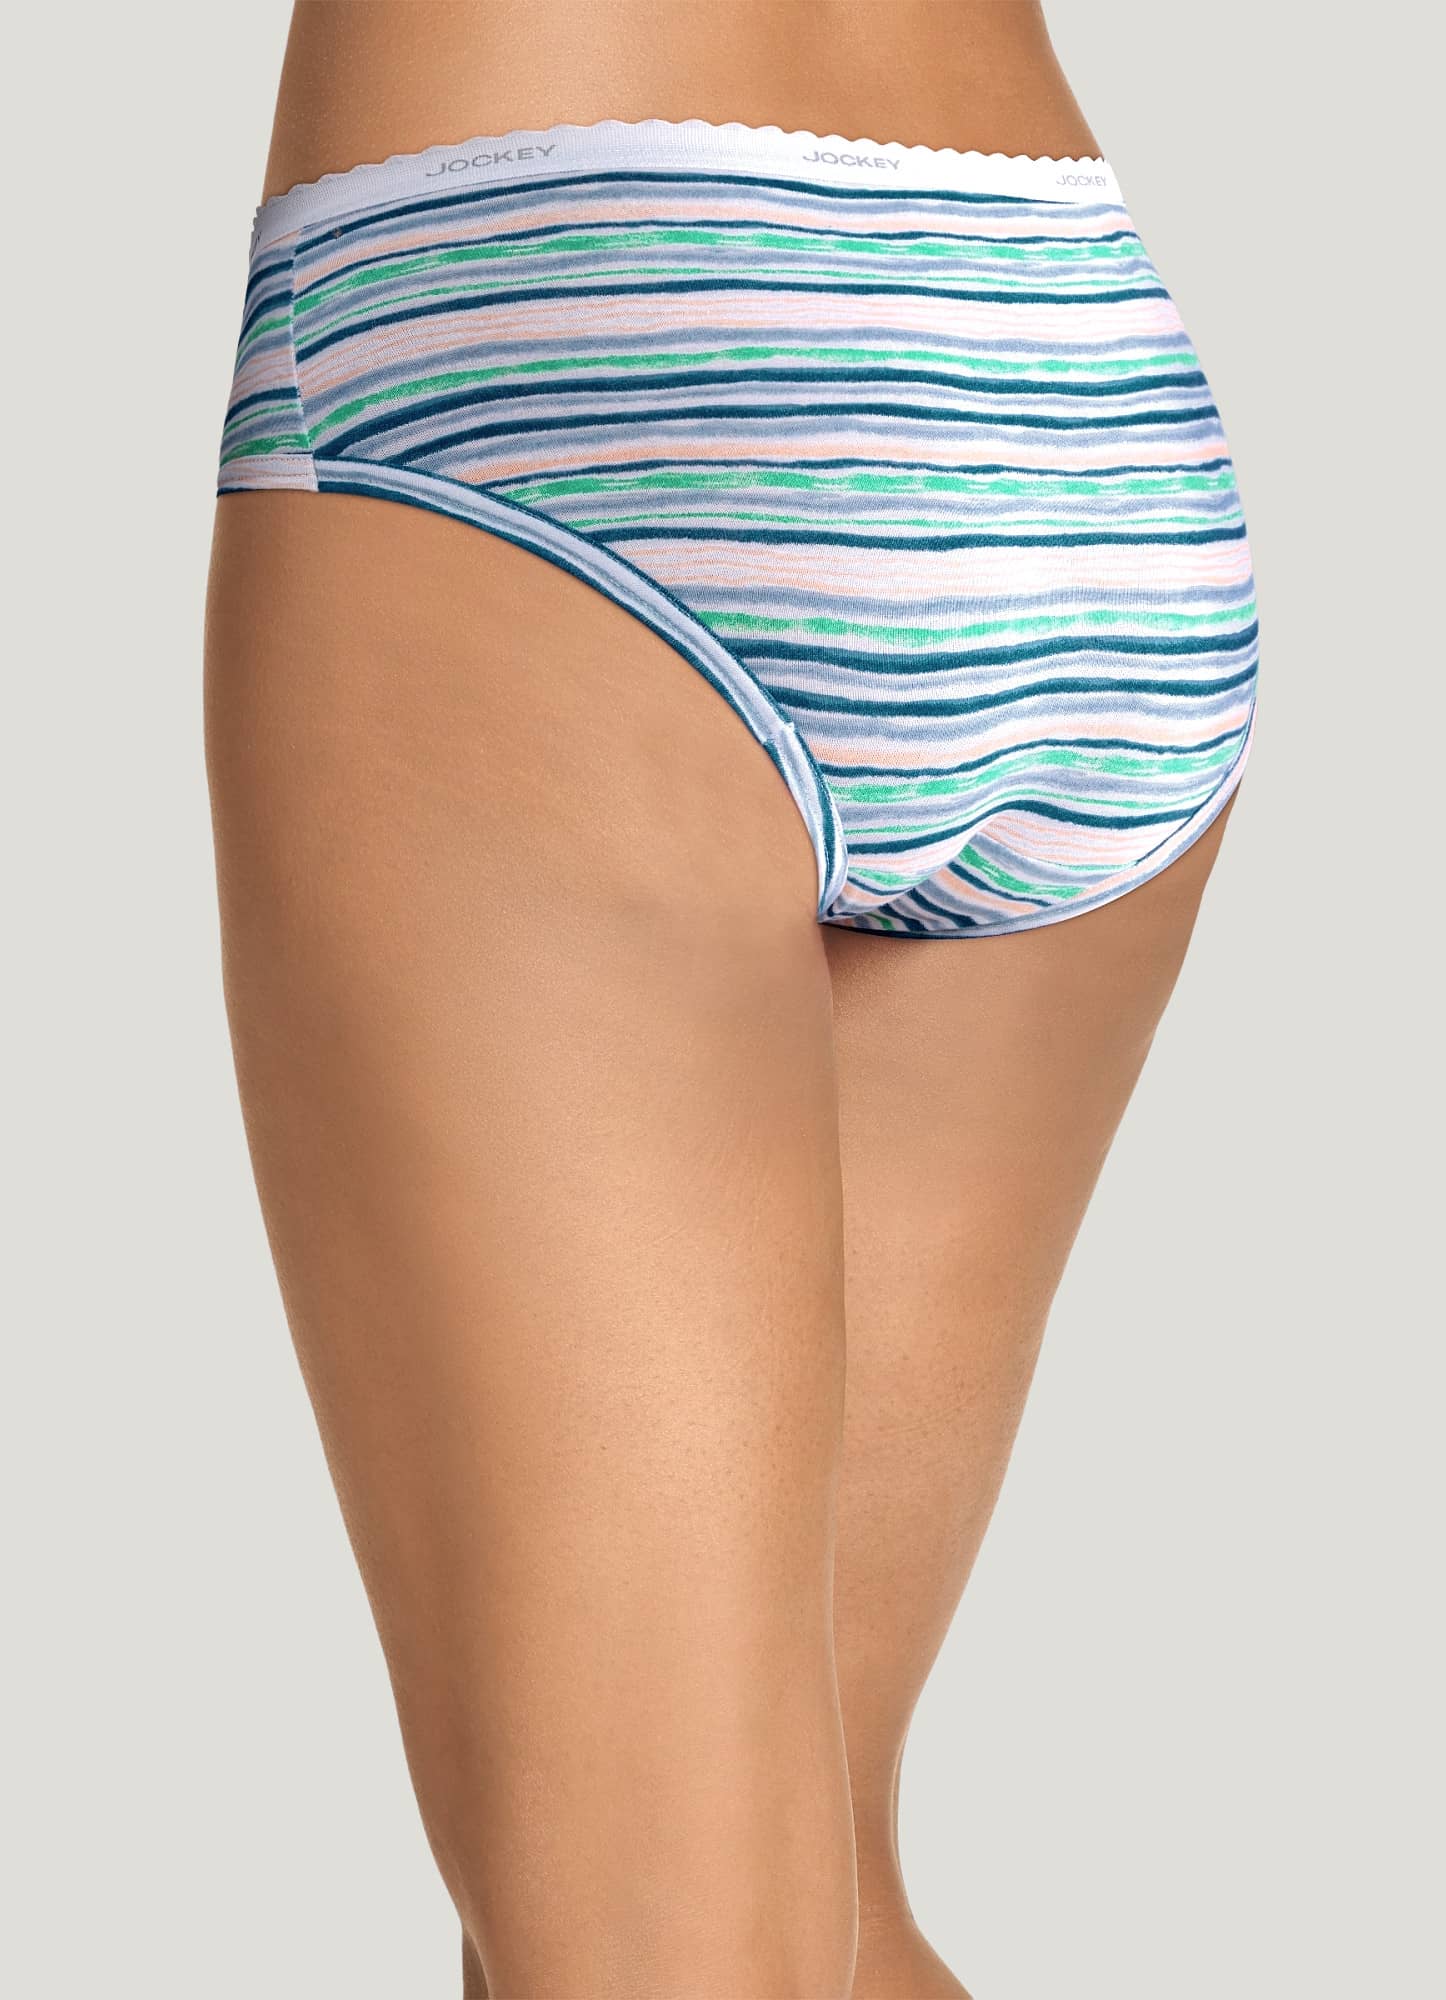 Jockey Women's Classic Brief - 3 Pack 5 Lake Sky/Emily Floral/Sage Mint